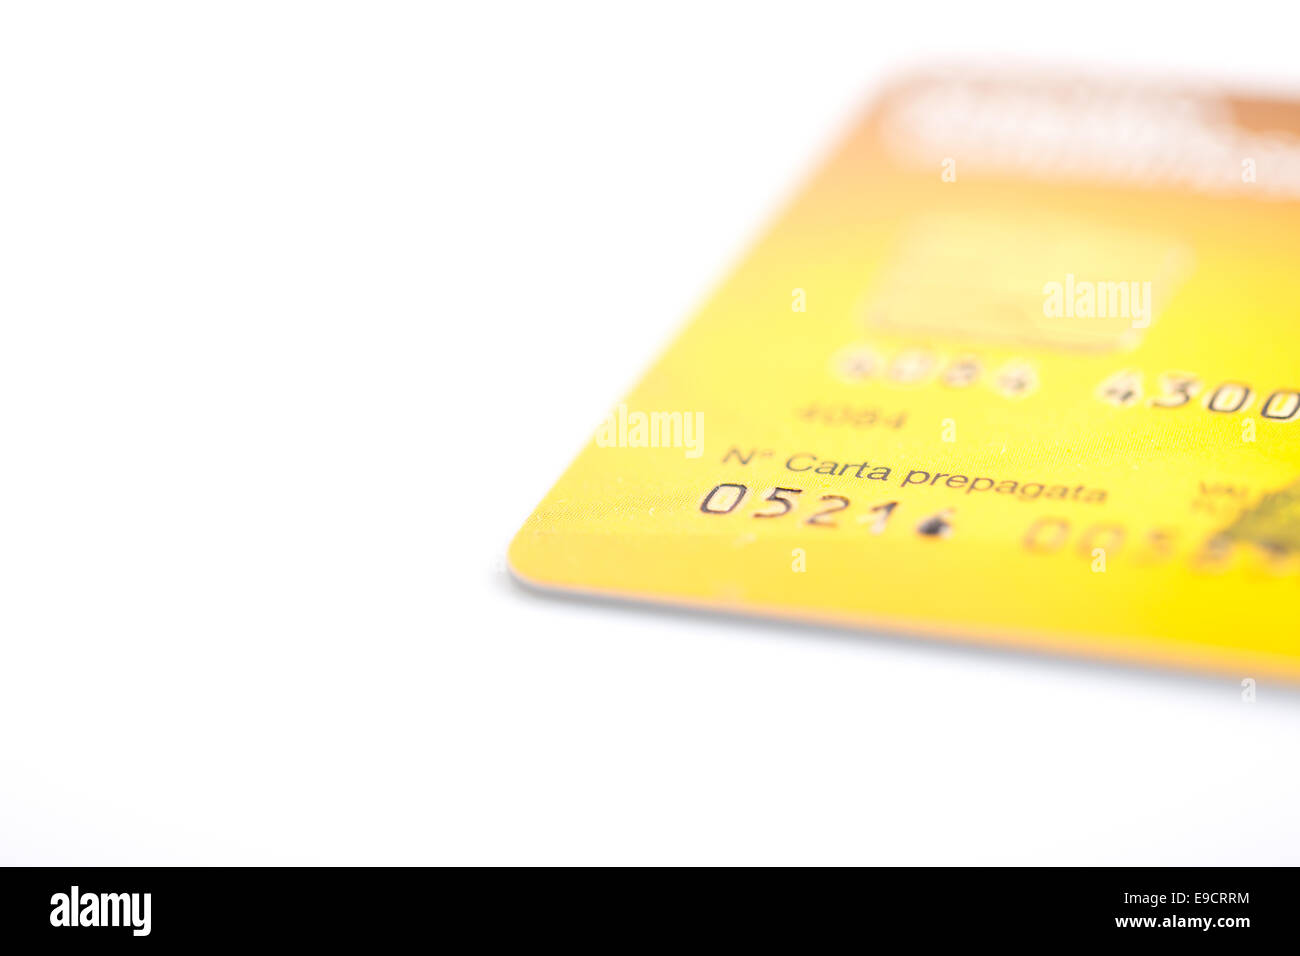 Close up of credit card on a white background Stock Photo